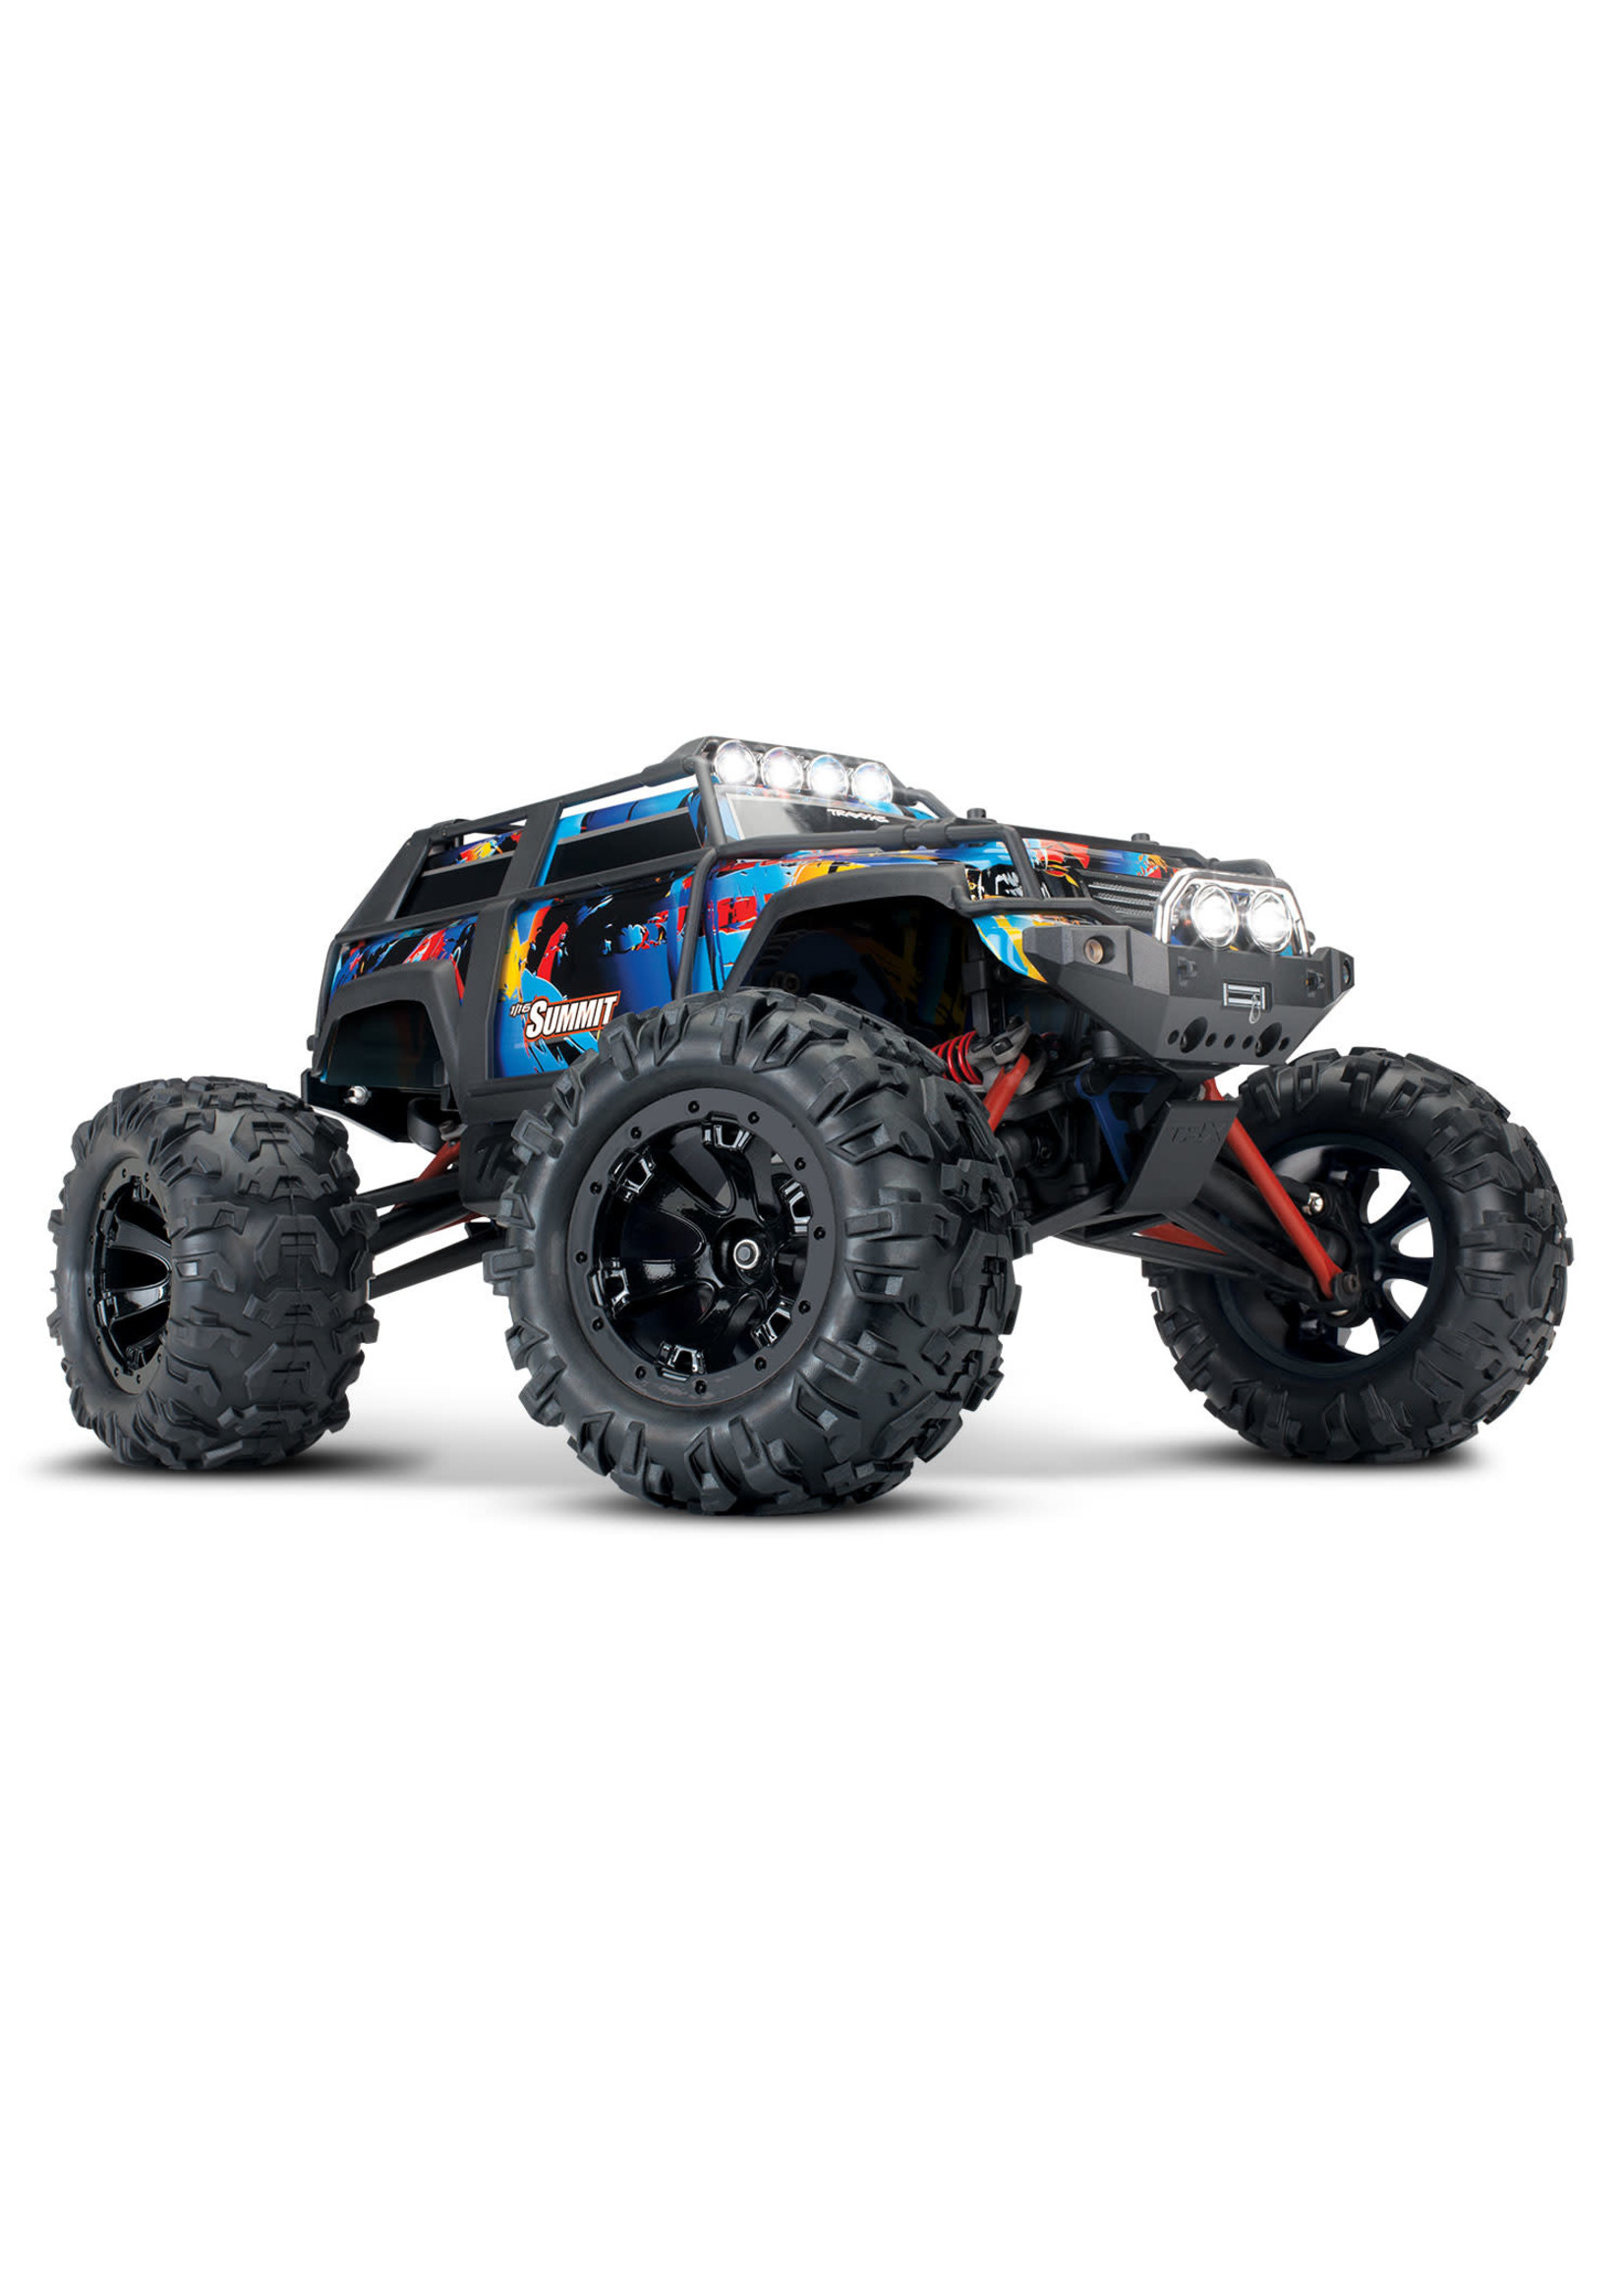 Traxxas TRA72054-5-RNR Traxxas Summit: 1/16-Scale 4WD Electric Extreme Terrain Monster Truck with TQ 2.4GHz radio system